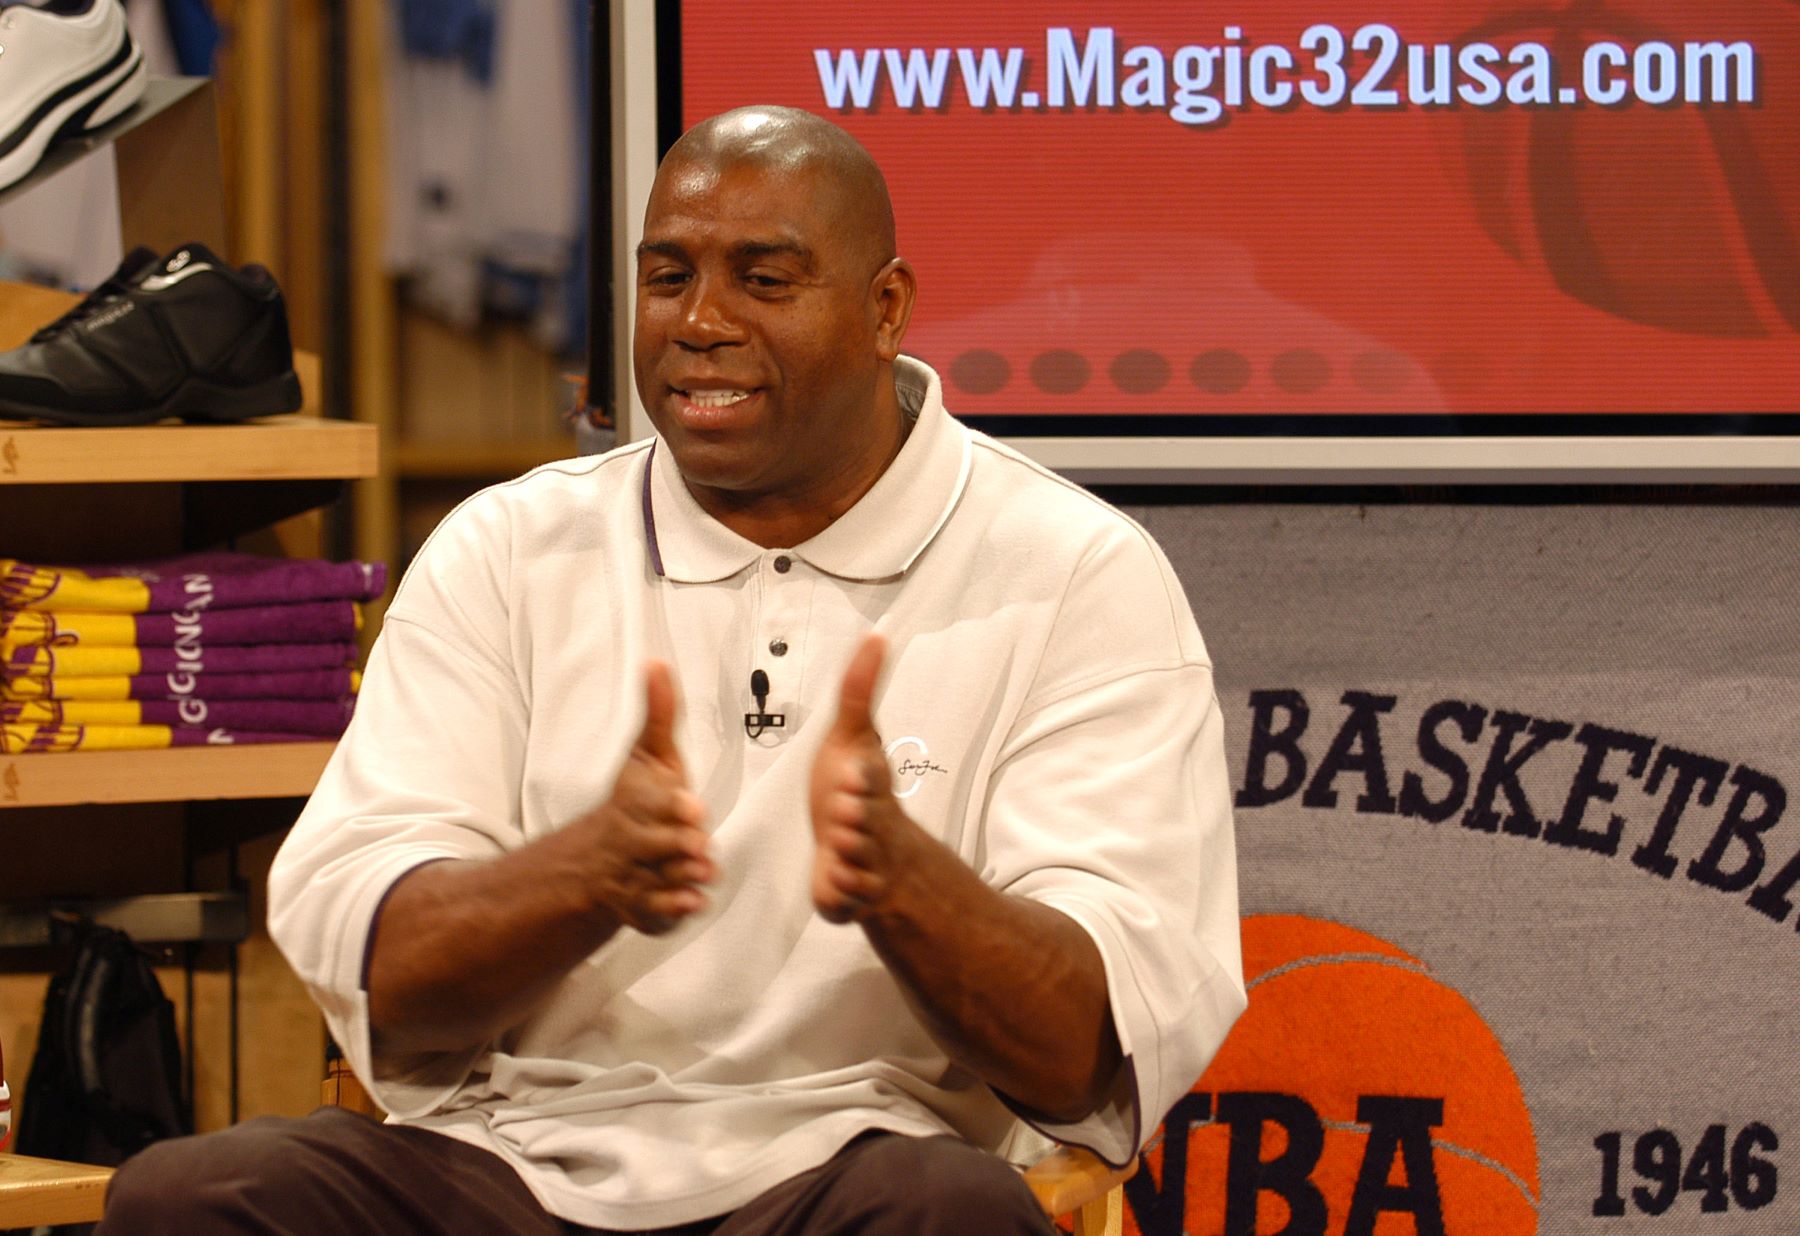 Magic Johnson launches his Magic32 footwear and apparel line at the NBA Store after once working with Converse